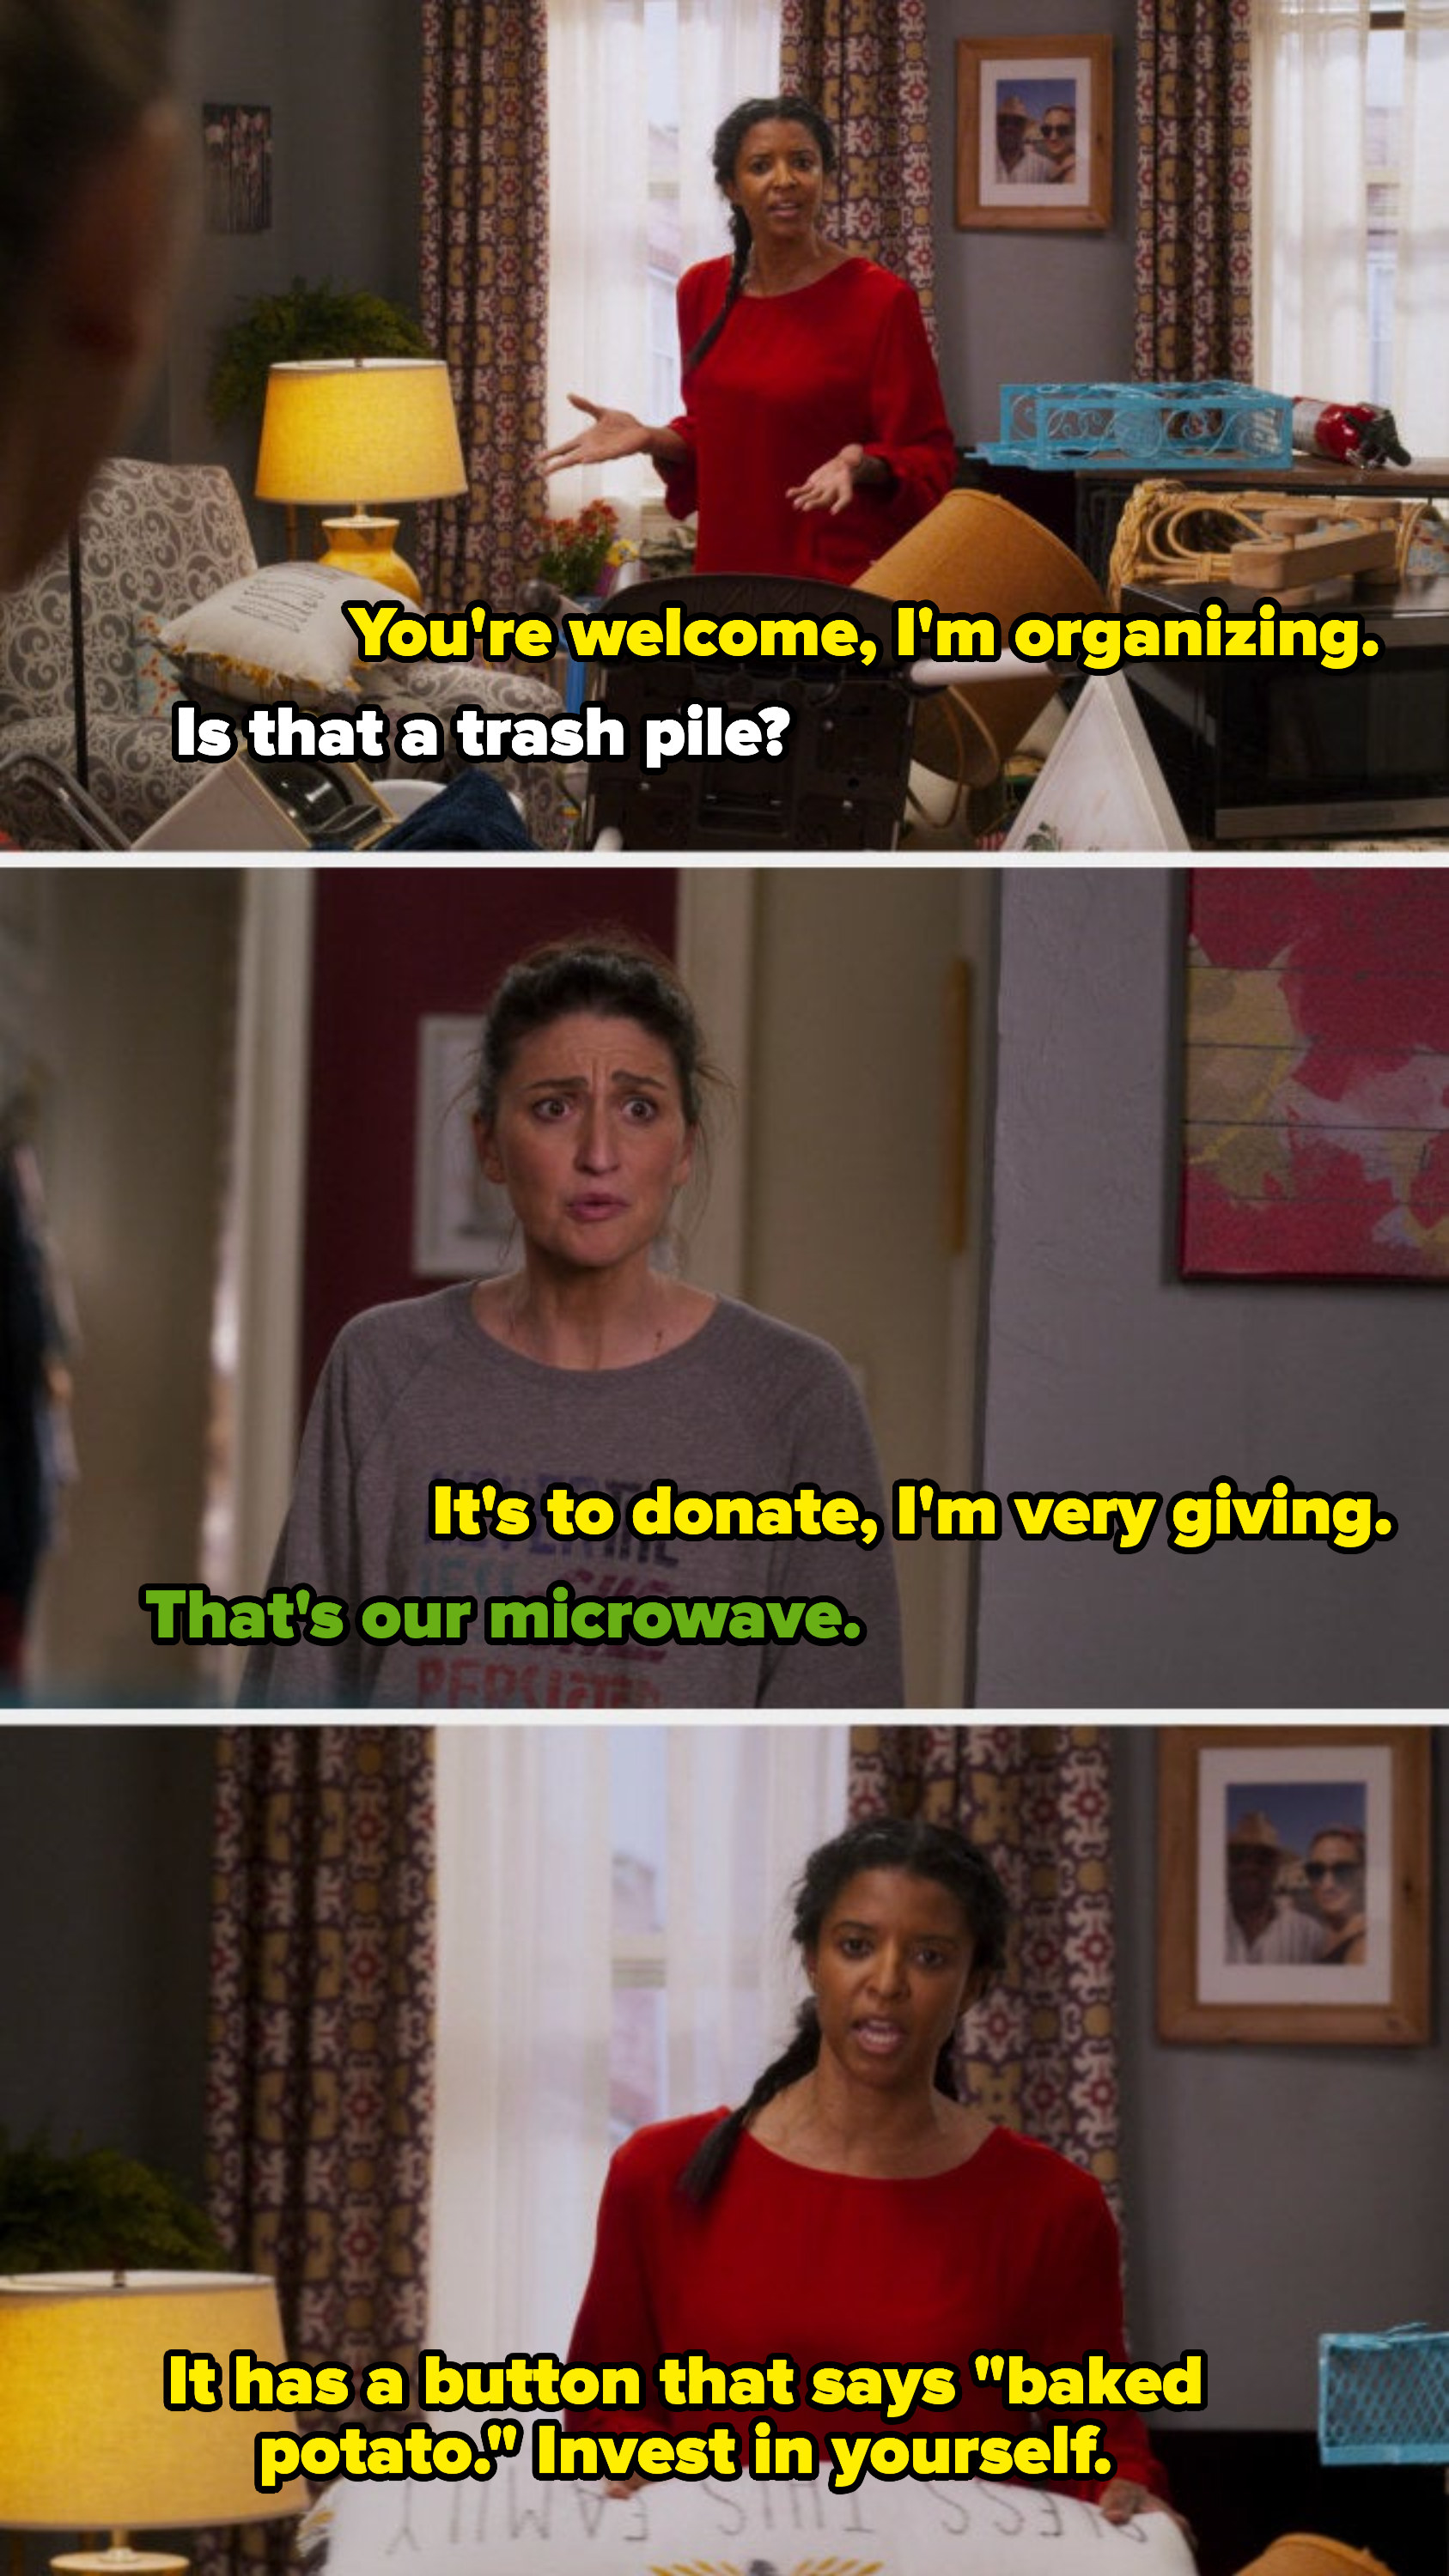 Her making a donation pile of Dawn&#x27;s things, including the microwave because it has a baked potato button and she should invest in herself